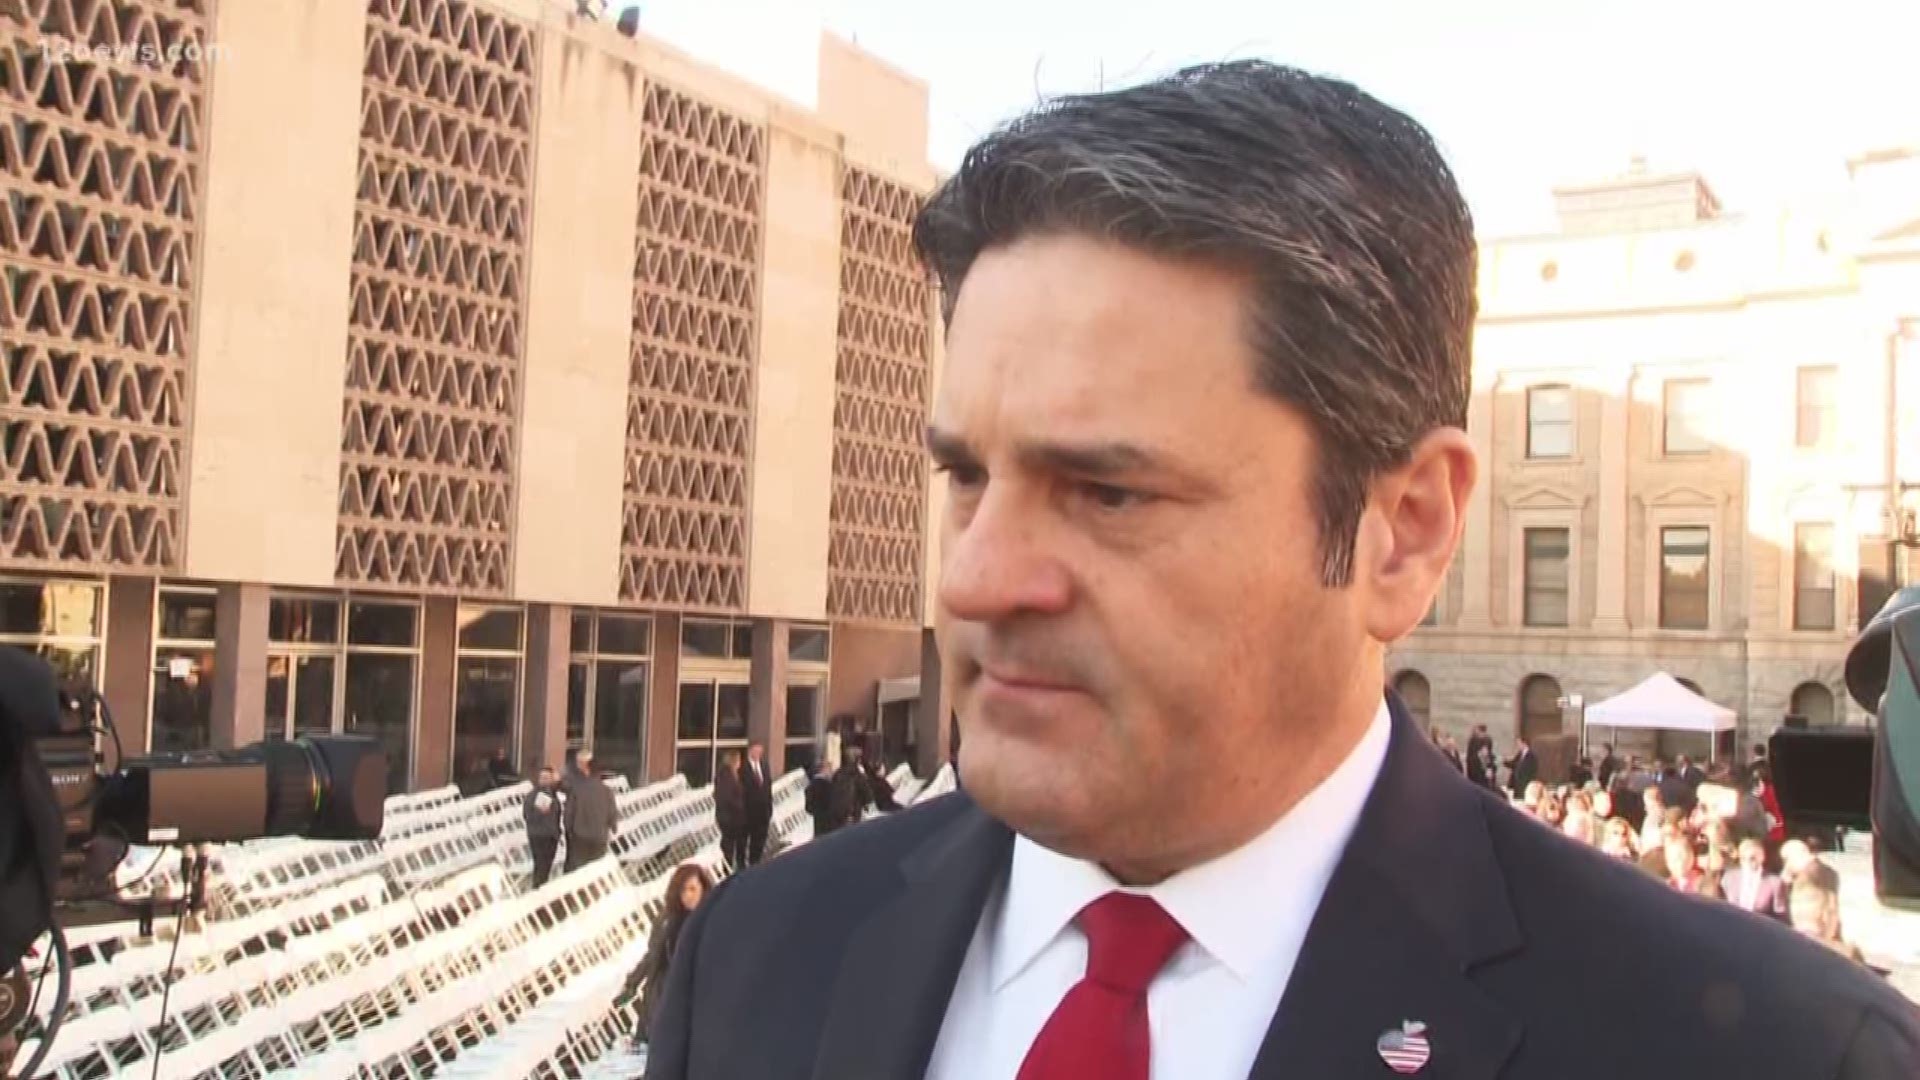 Governor Doug Ducey was inaugurated for his second term this morning. In his speech, the governor addressed education and teacher's wages. Teachers are saying his promises may not be enough.